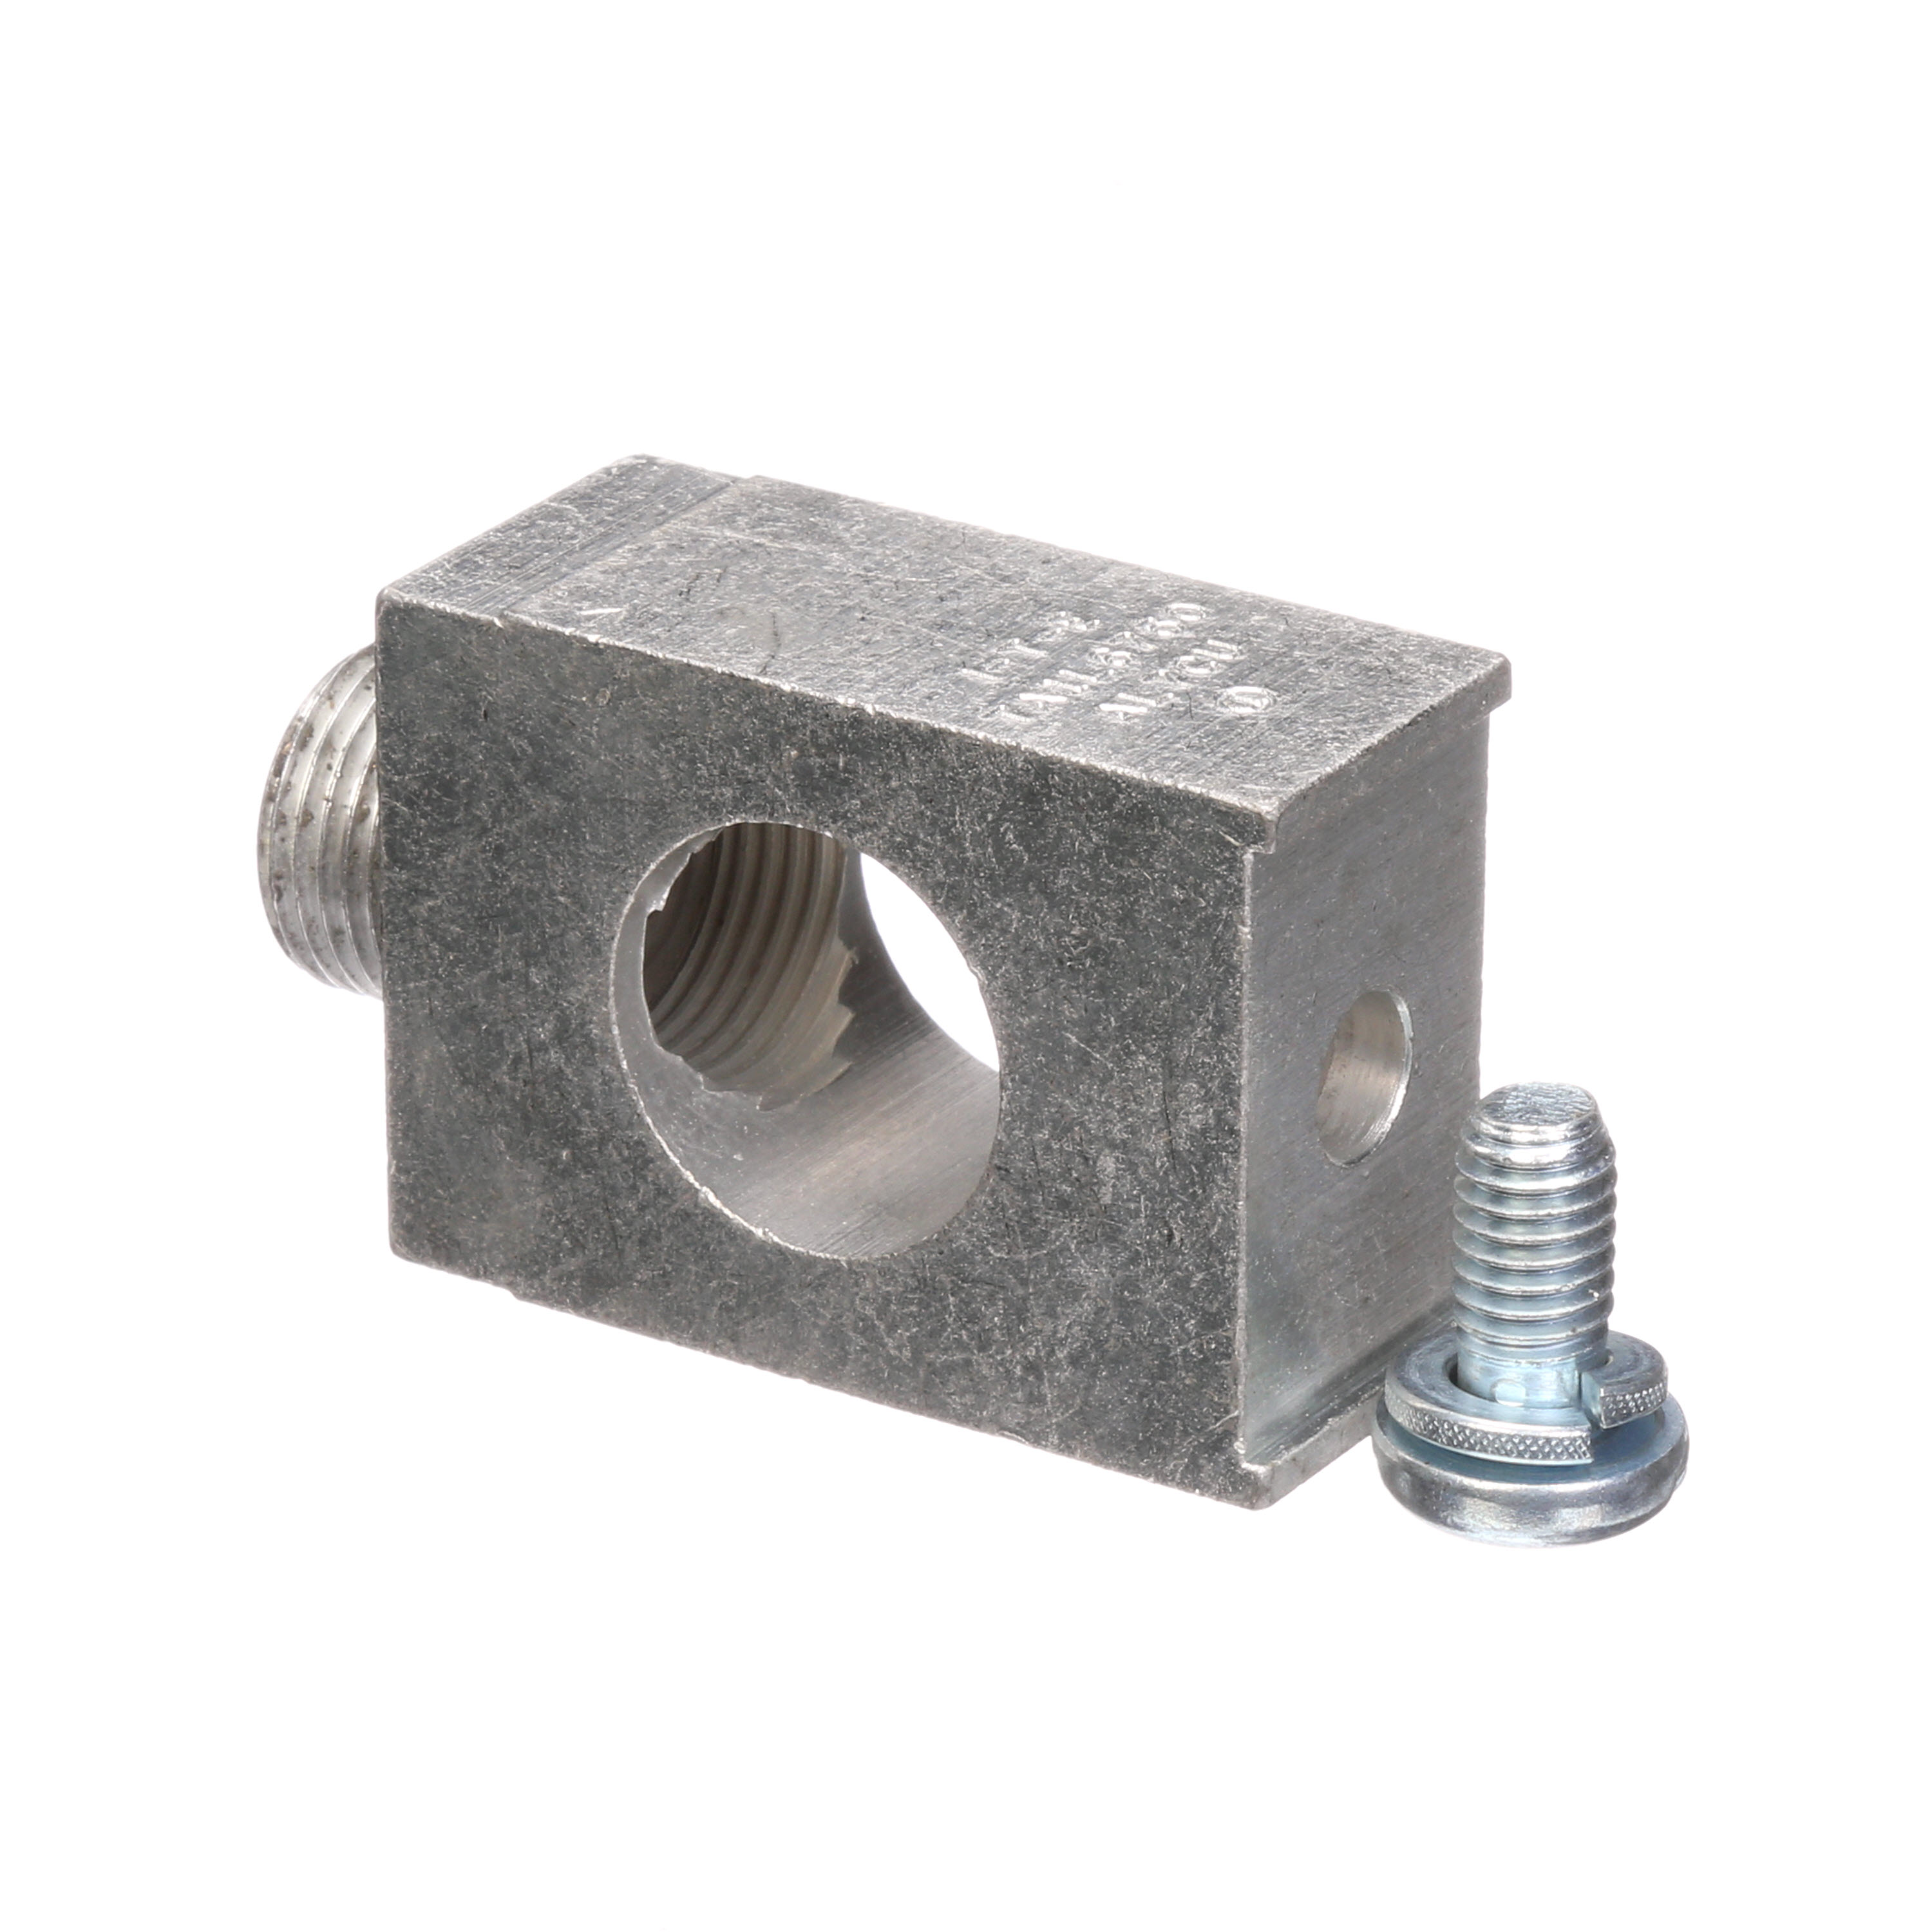 SIEMENS LOW VOLTAGE SENTRON MOLDED CASE CIRCUIT BREAKER ACCESSORY. ALUMINUM BODY LUG FOR 2/3-POLE 250A - 600A JD AND LD FRAME BREAKER. WIRE RANGE 500 - 600KCMIL (CU) / 500 - 750KCMIL (AL) - 1 BARREL LUG. SUITABLE FOR LINE AND LOAD SIDES. SINGLE LUG.